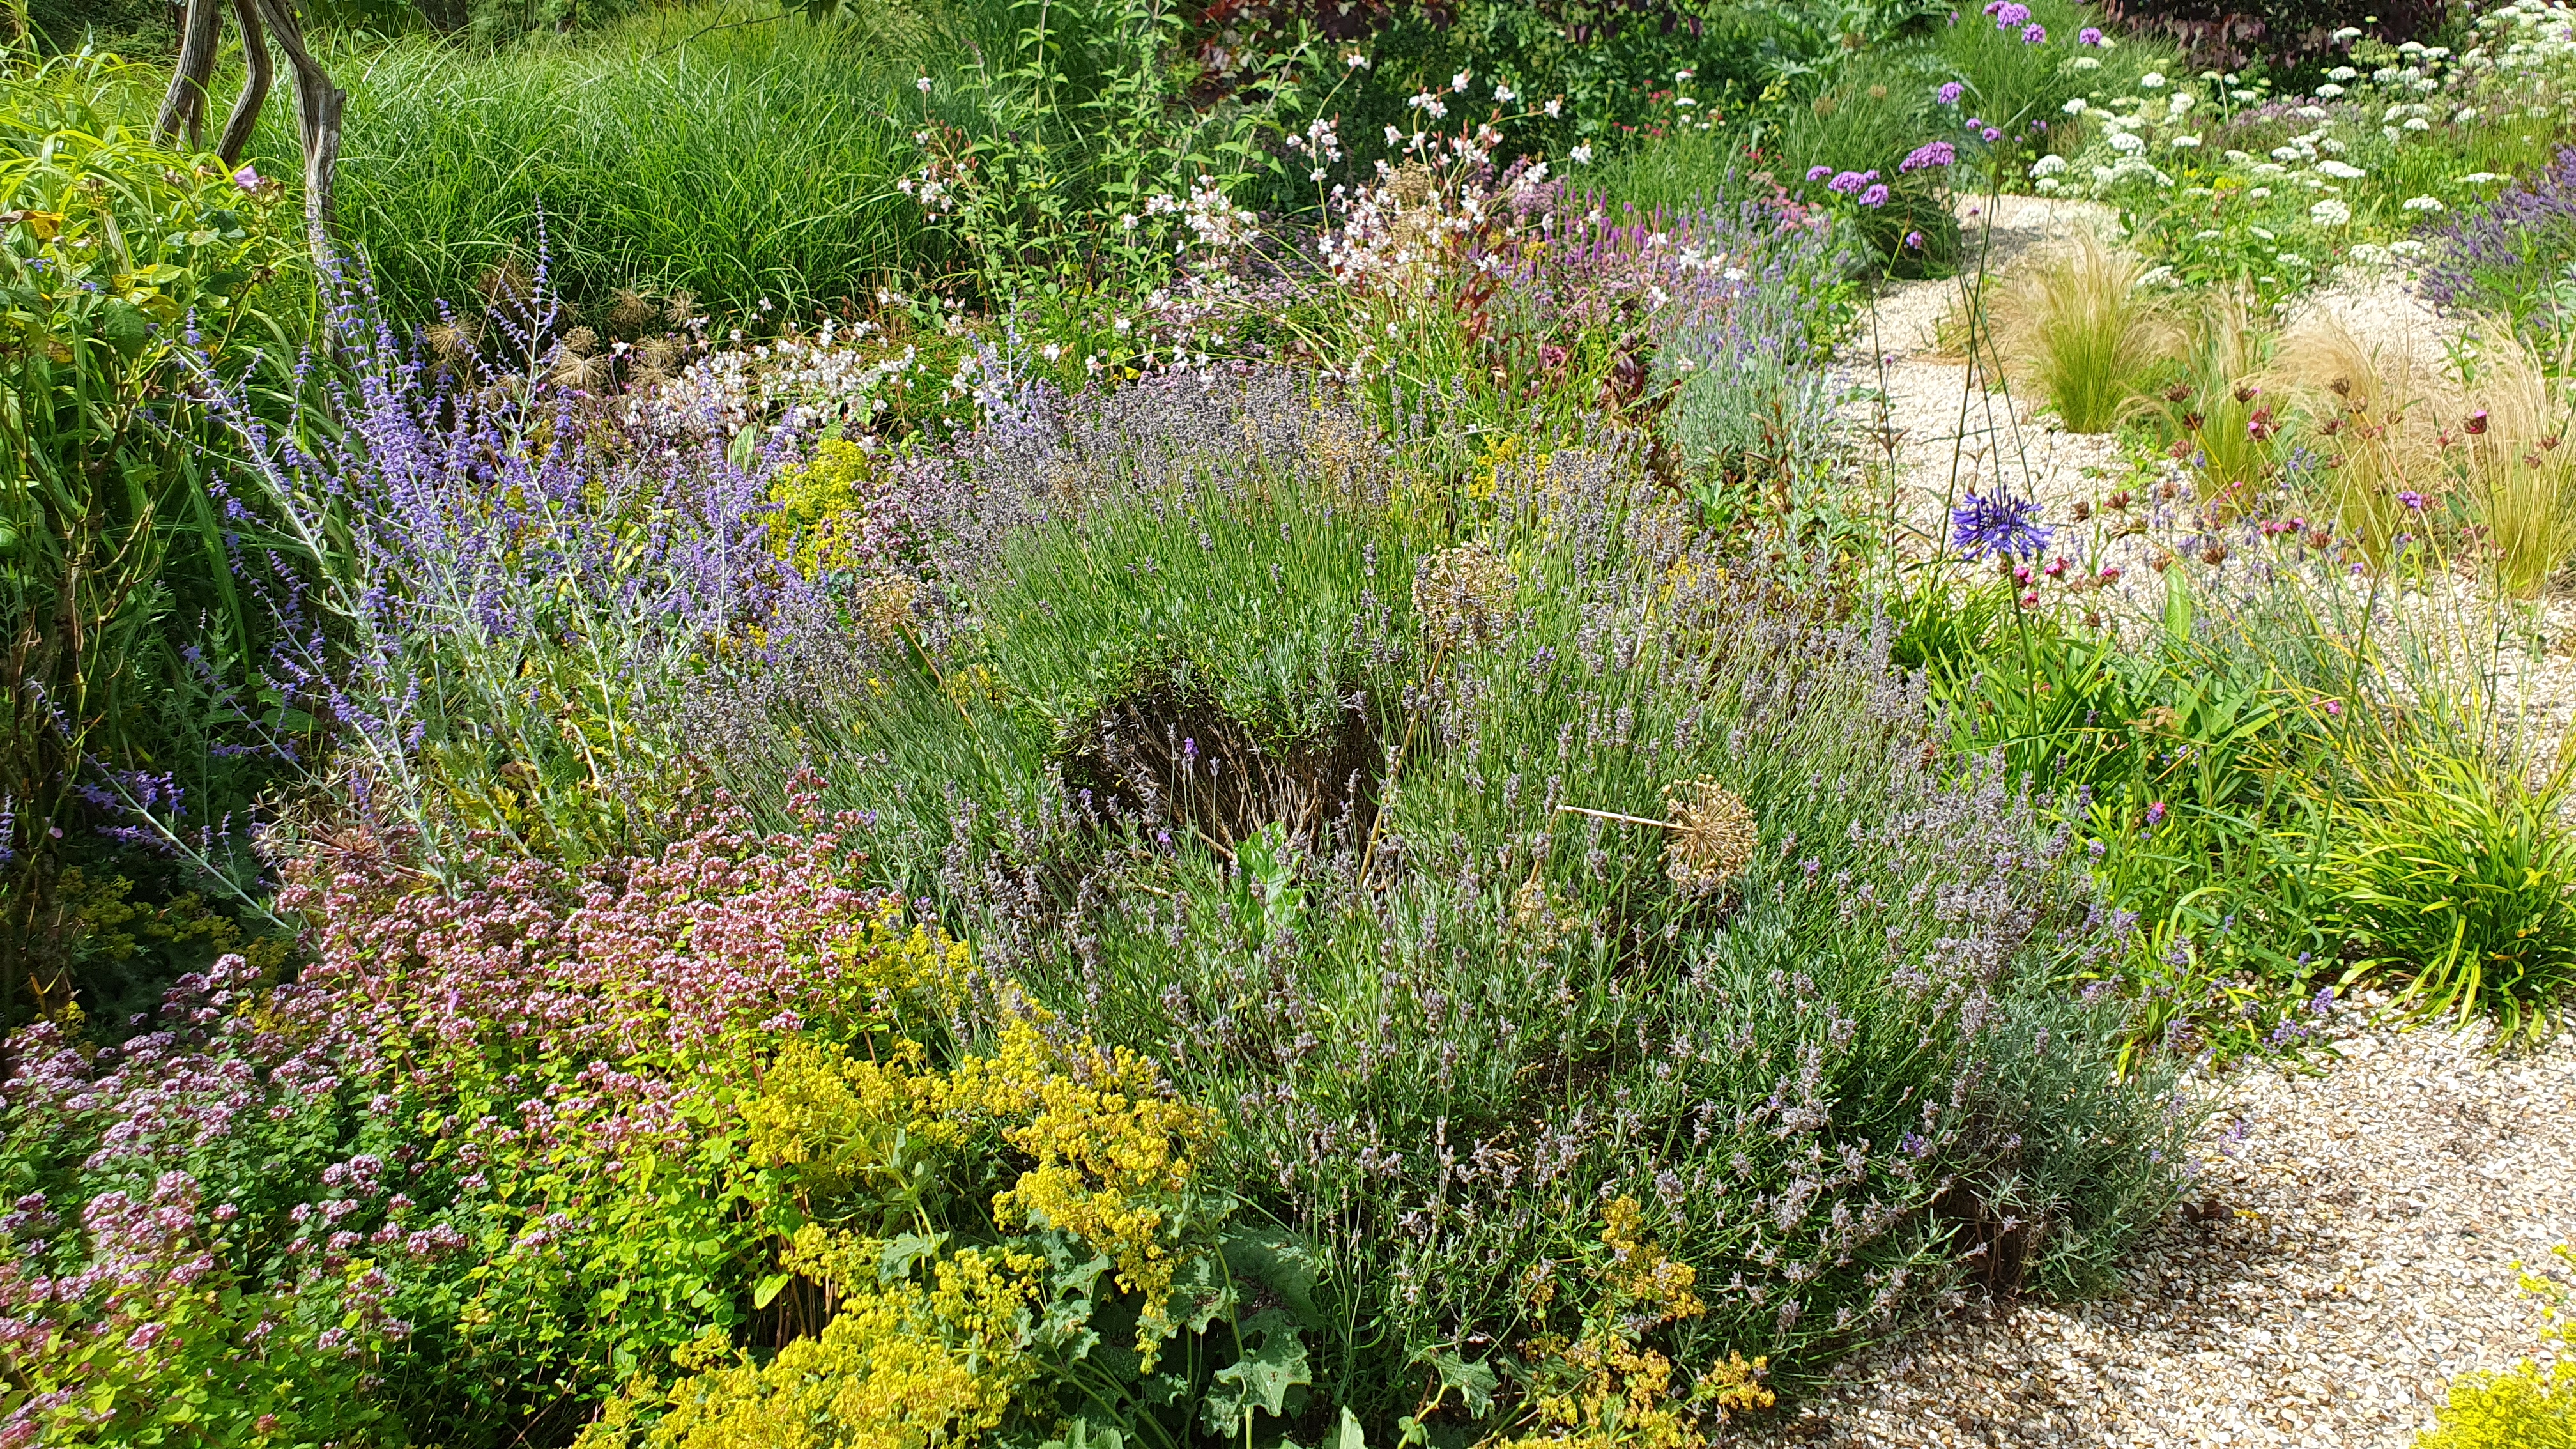 Some plants that currently thrive in the UK are unlikely to survive if temperatures continue to increase. But others, such as this Lavender Hidcote, thrive in a warmer Mediterranean climate./CGTN.